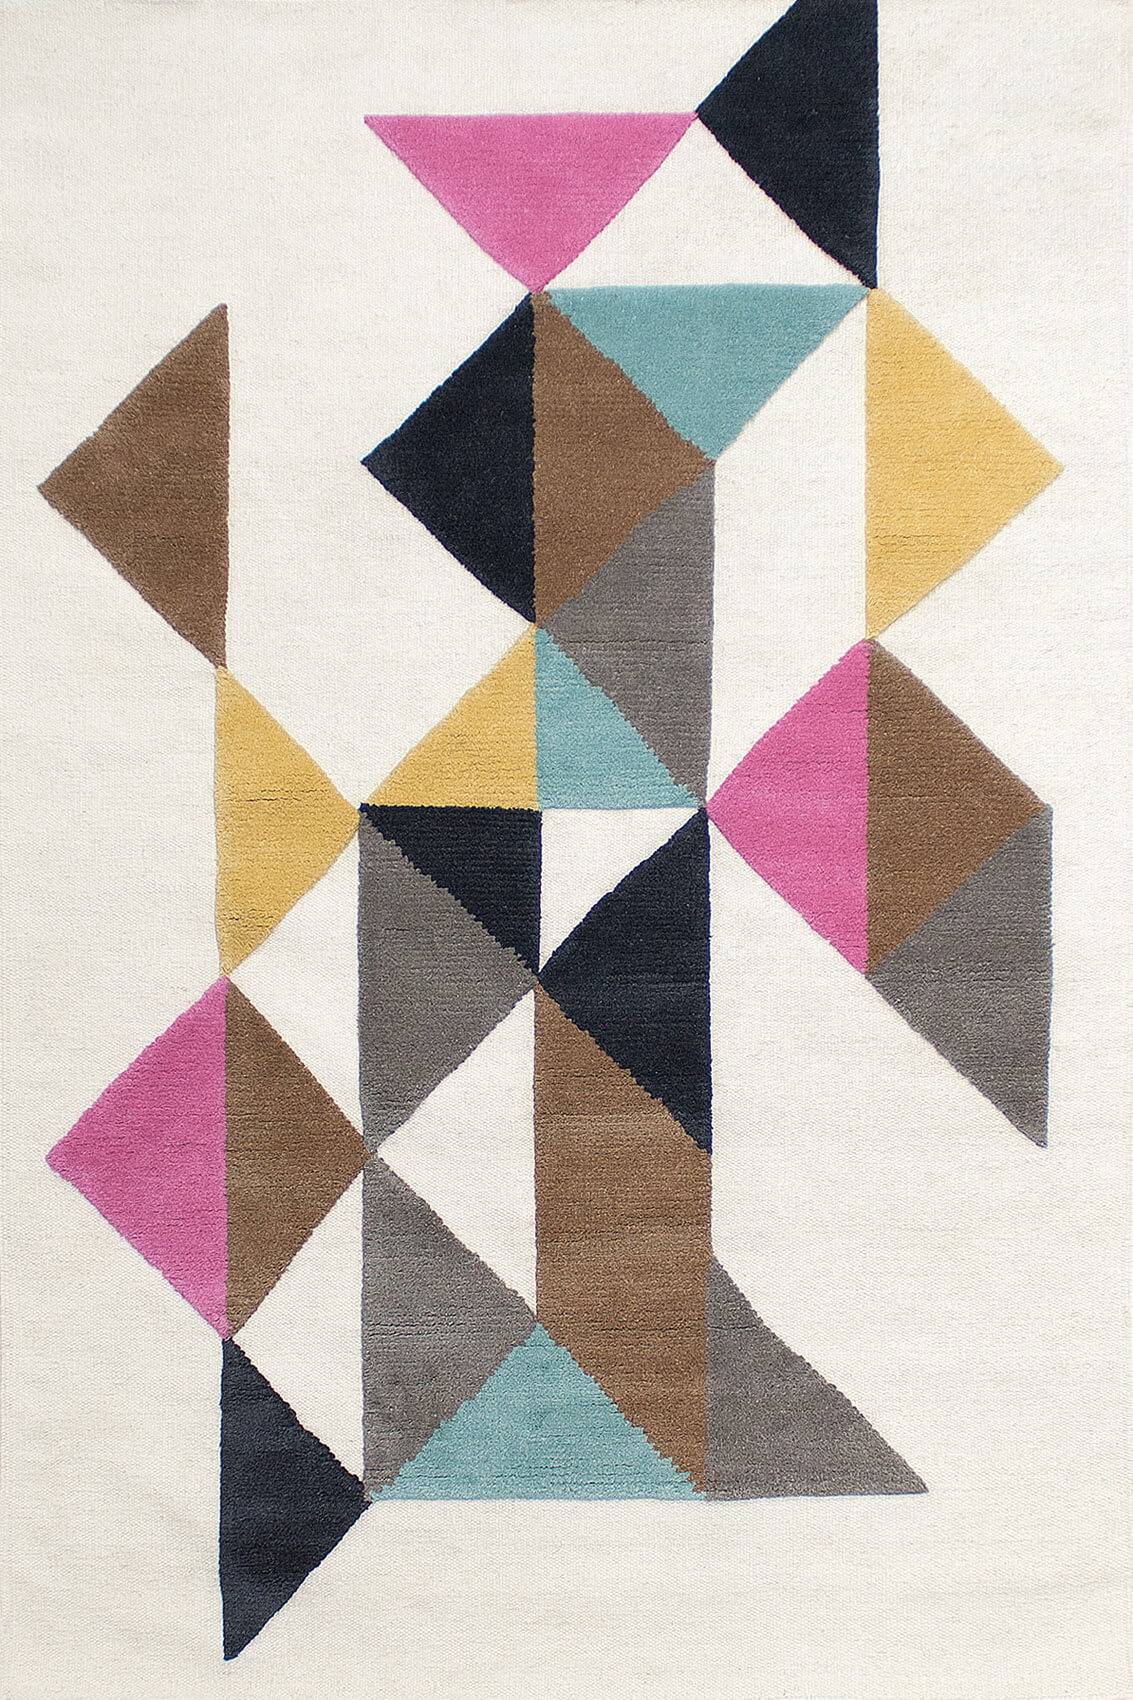 Busy Rug by Serge Lesage